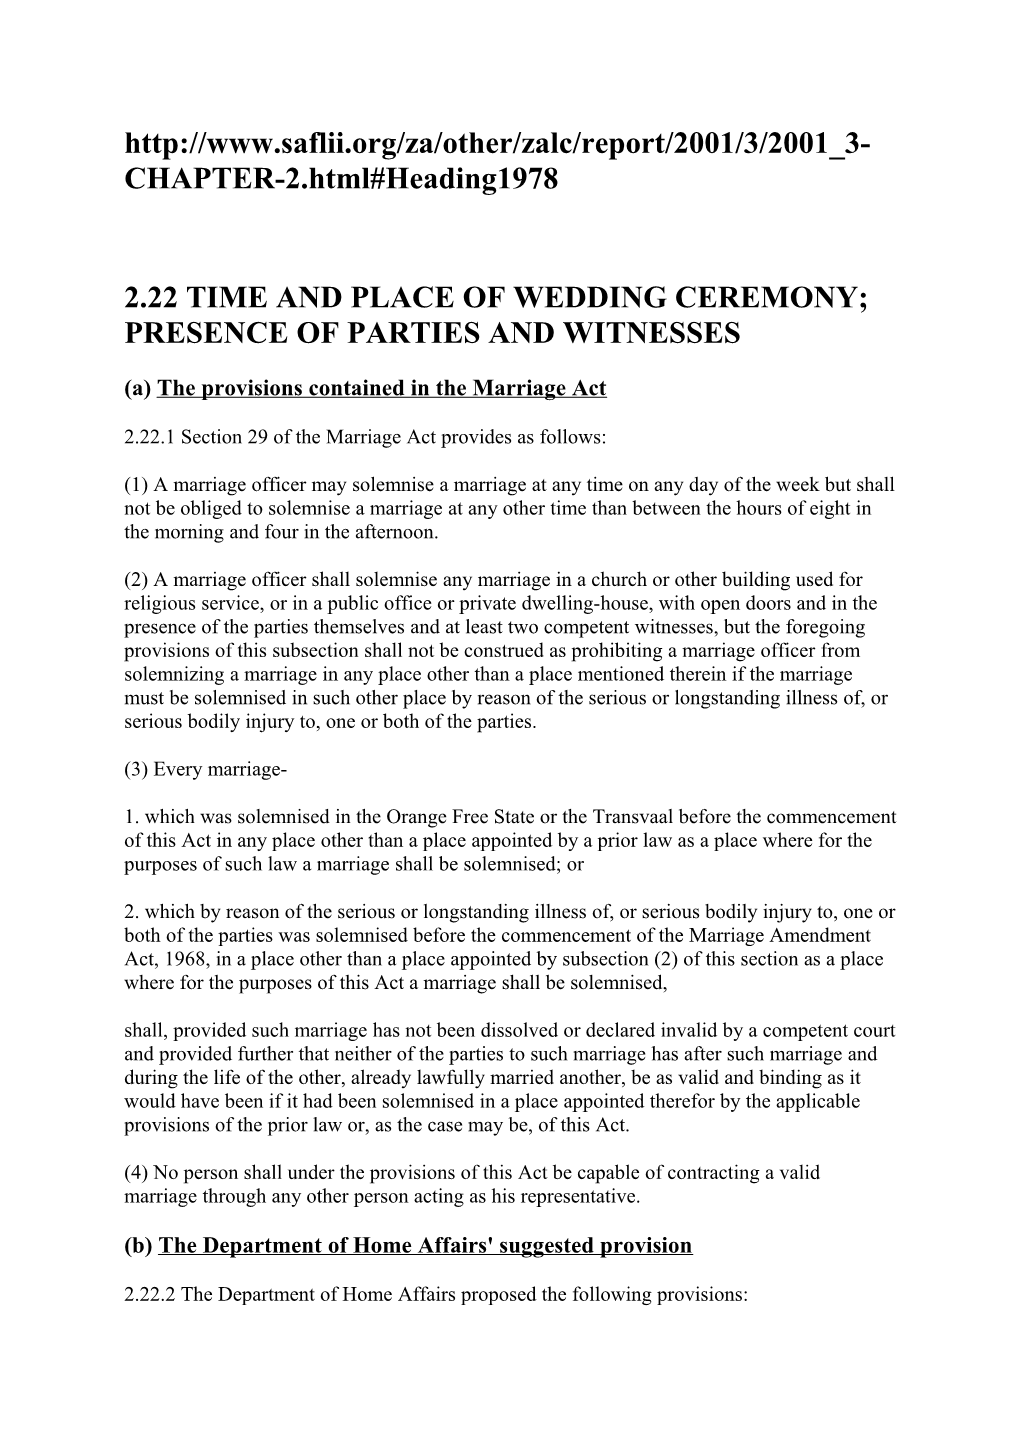 2.22 Time and Place of Wedding Ceremony; Presence of Parties and Witnesses